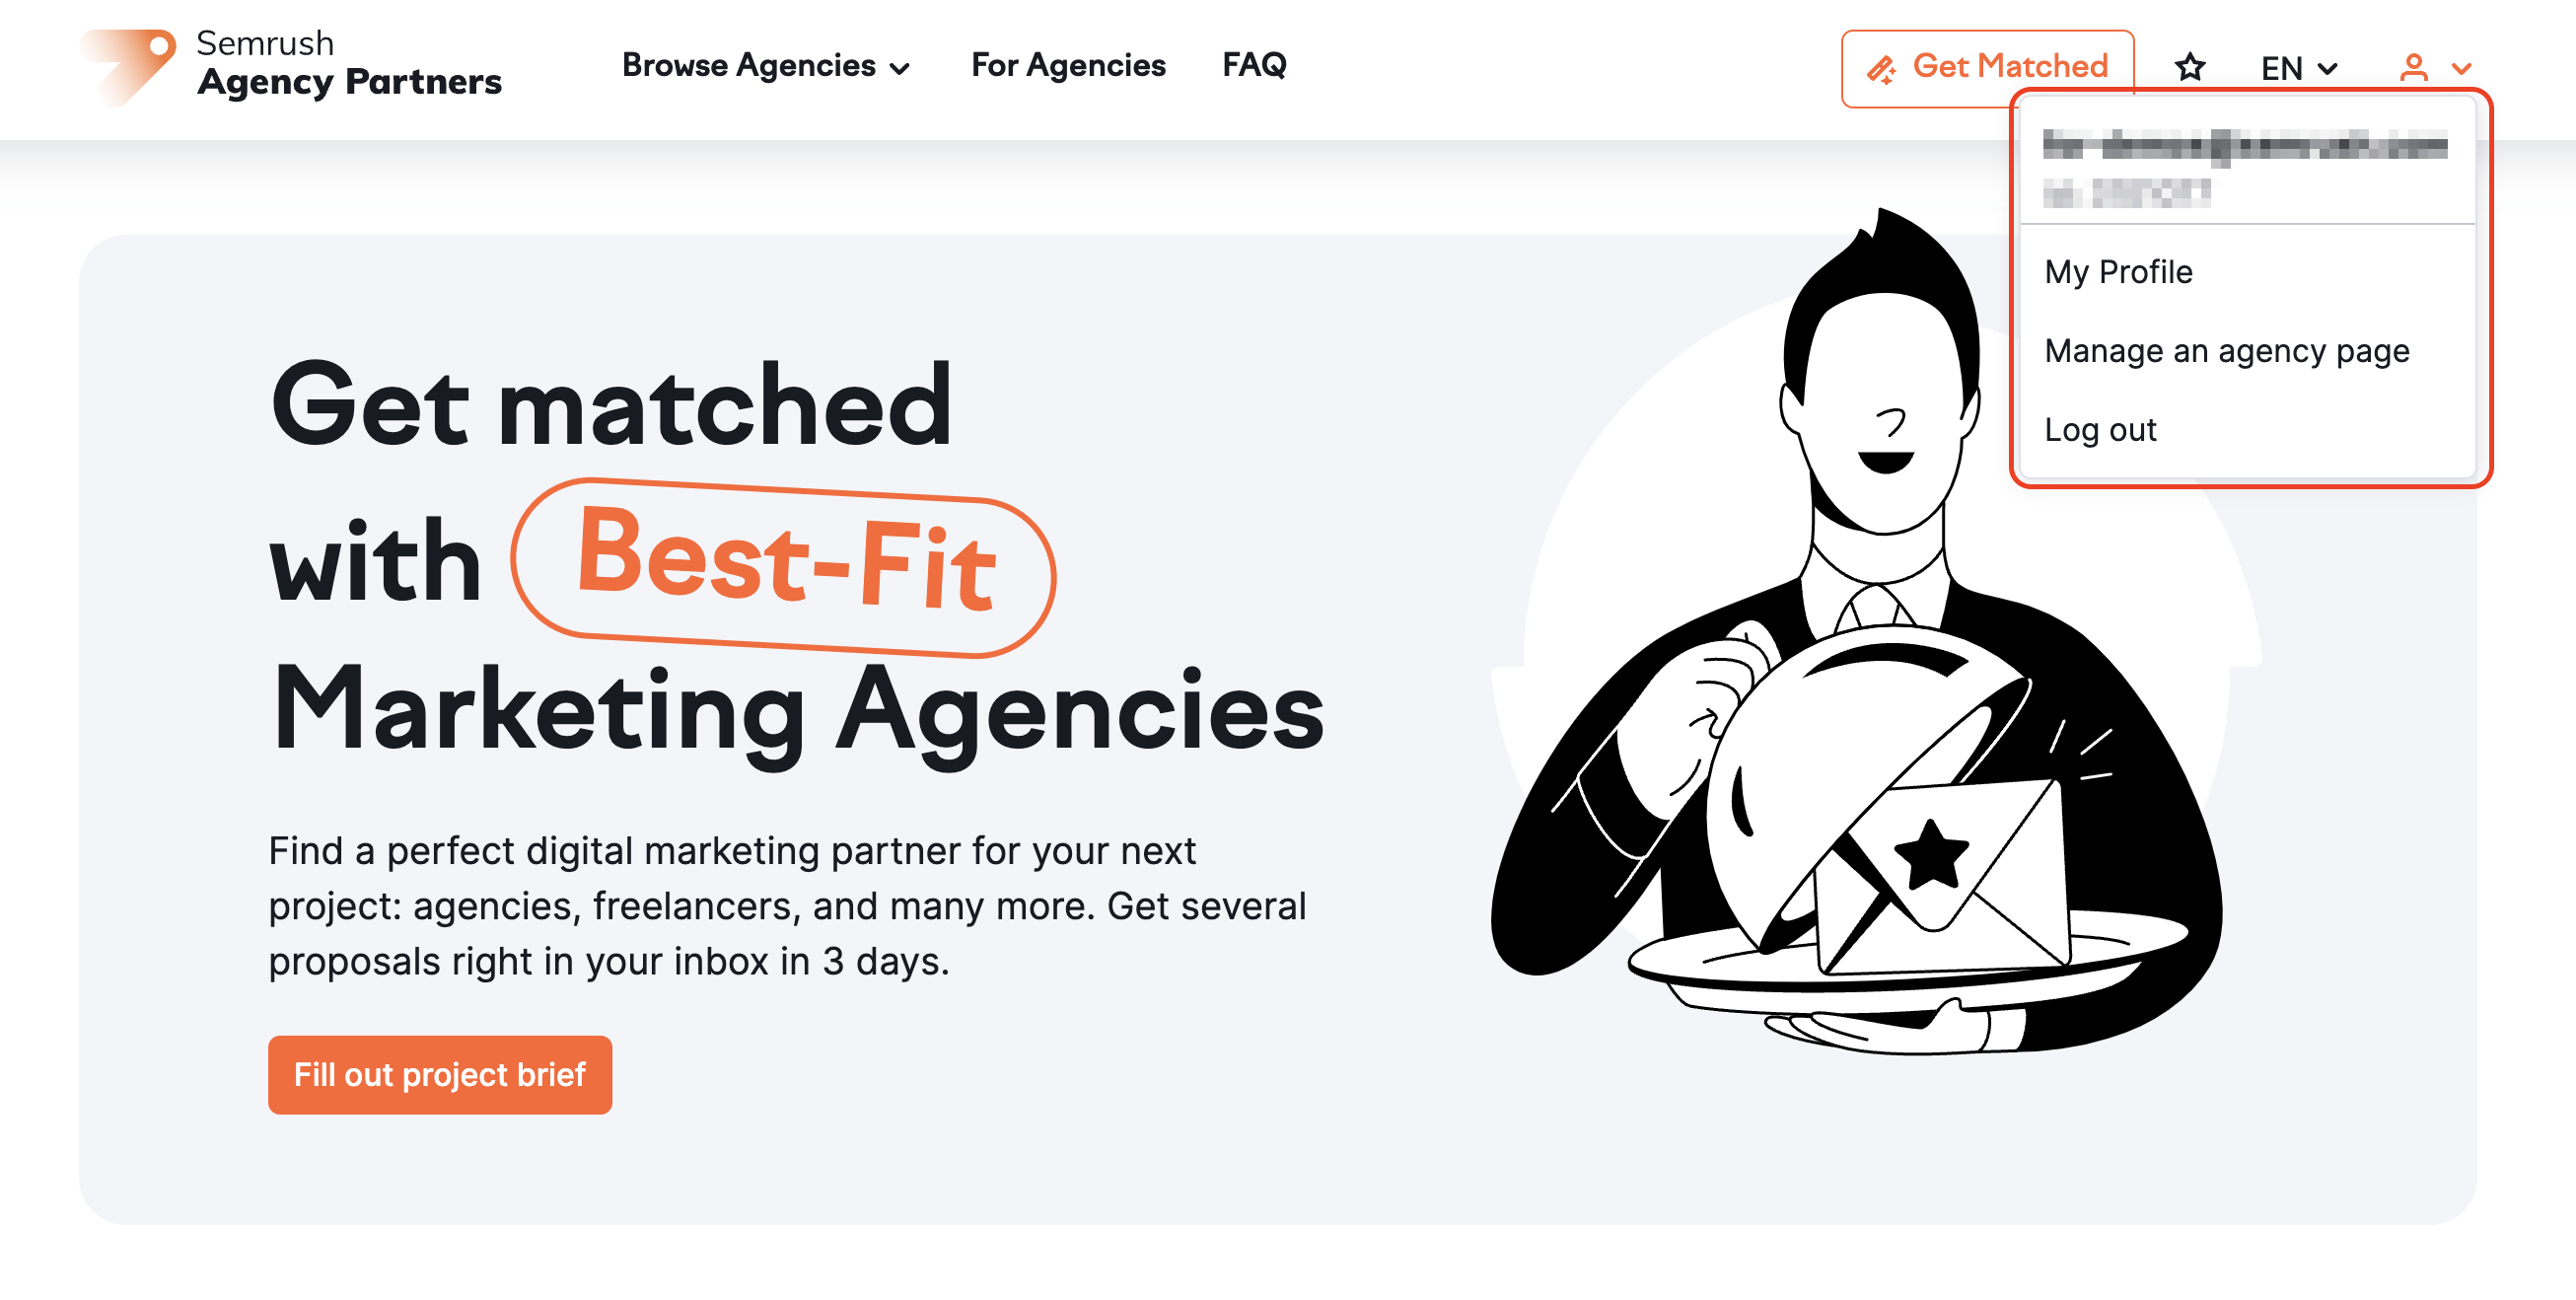 Semrush Agency Partners page with the account menu drop-down at the top-right of the page, which appears after clicking the Person icon.  